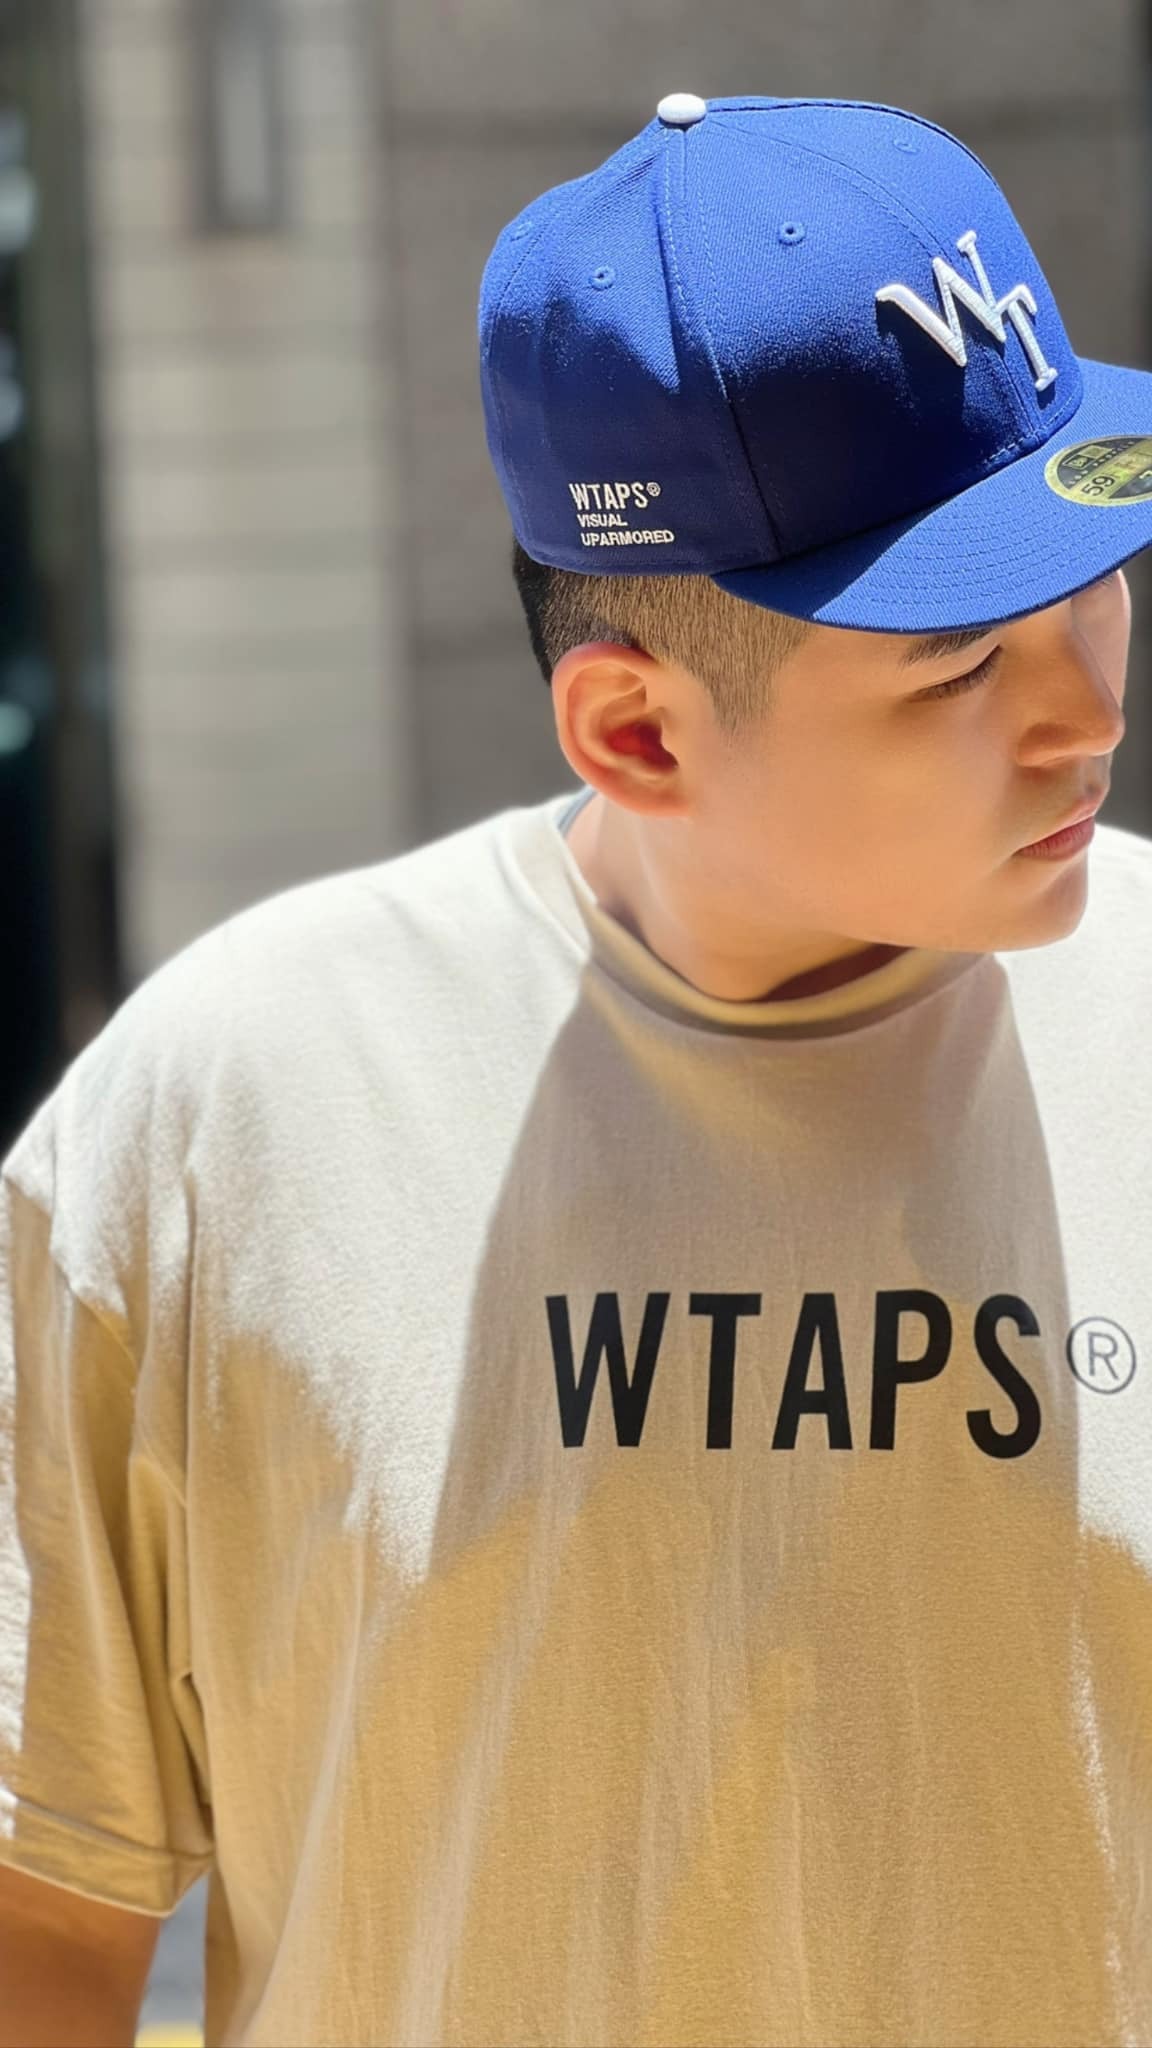 WTAPS 59FIFTY LOW PROFILE CAP 7 1/2 L - キャップ